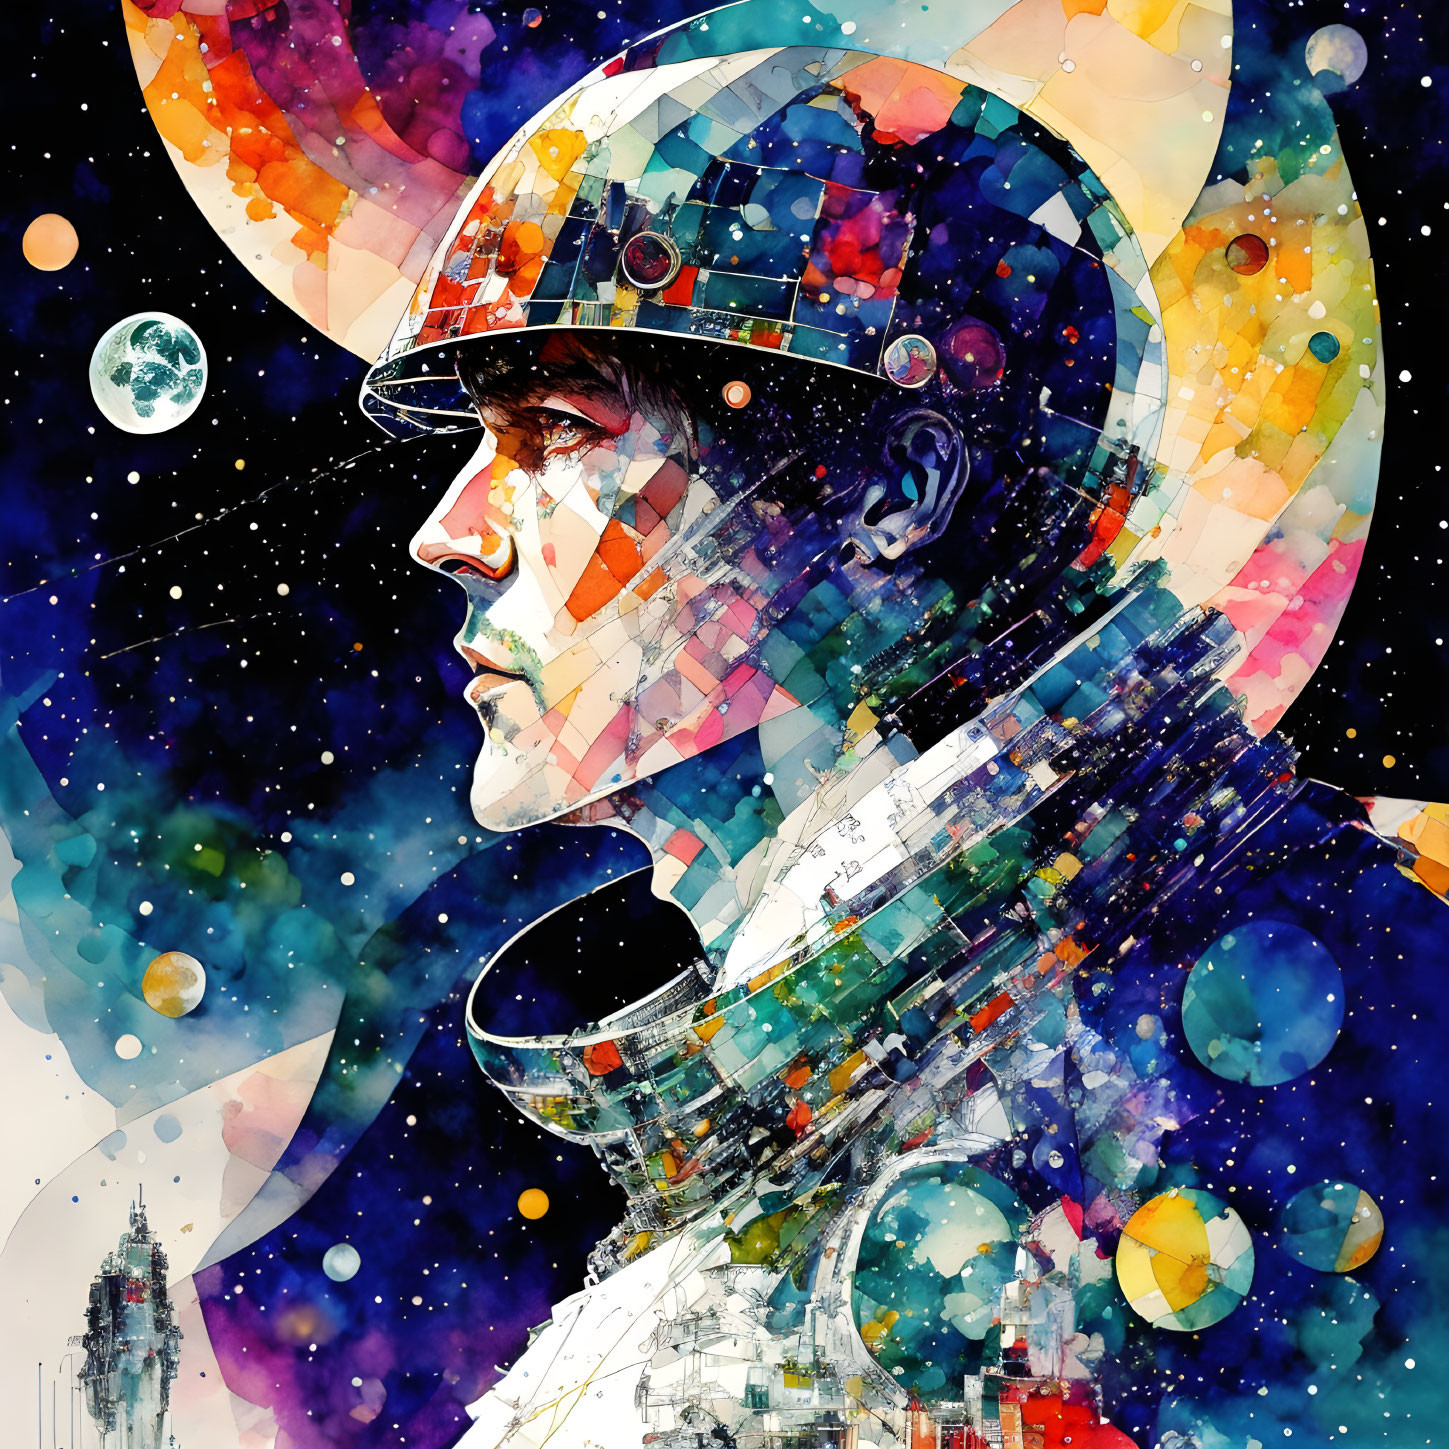 Abstract Watercolor Painting: Astronaut in Cosmic Scene